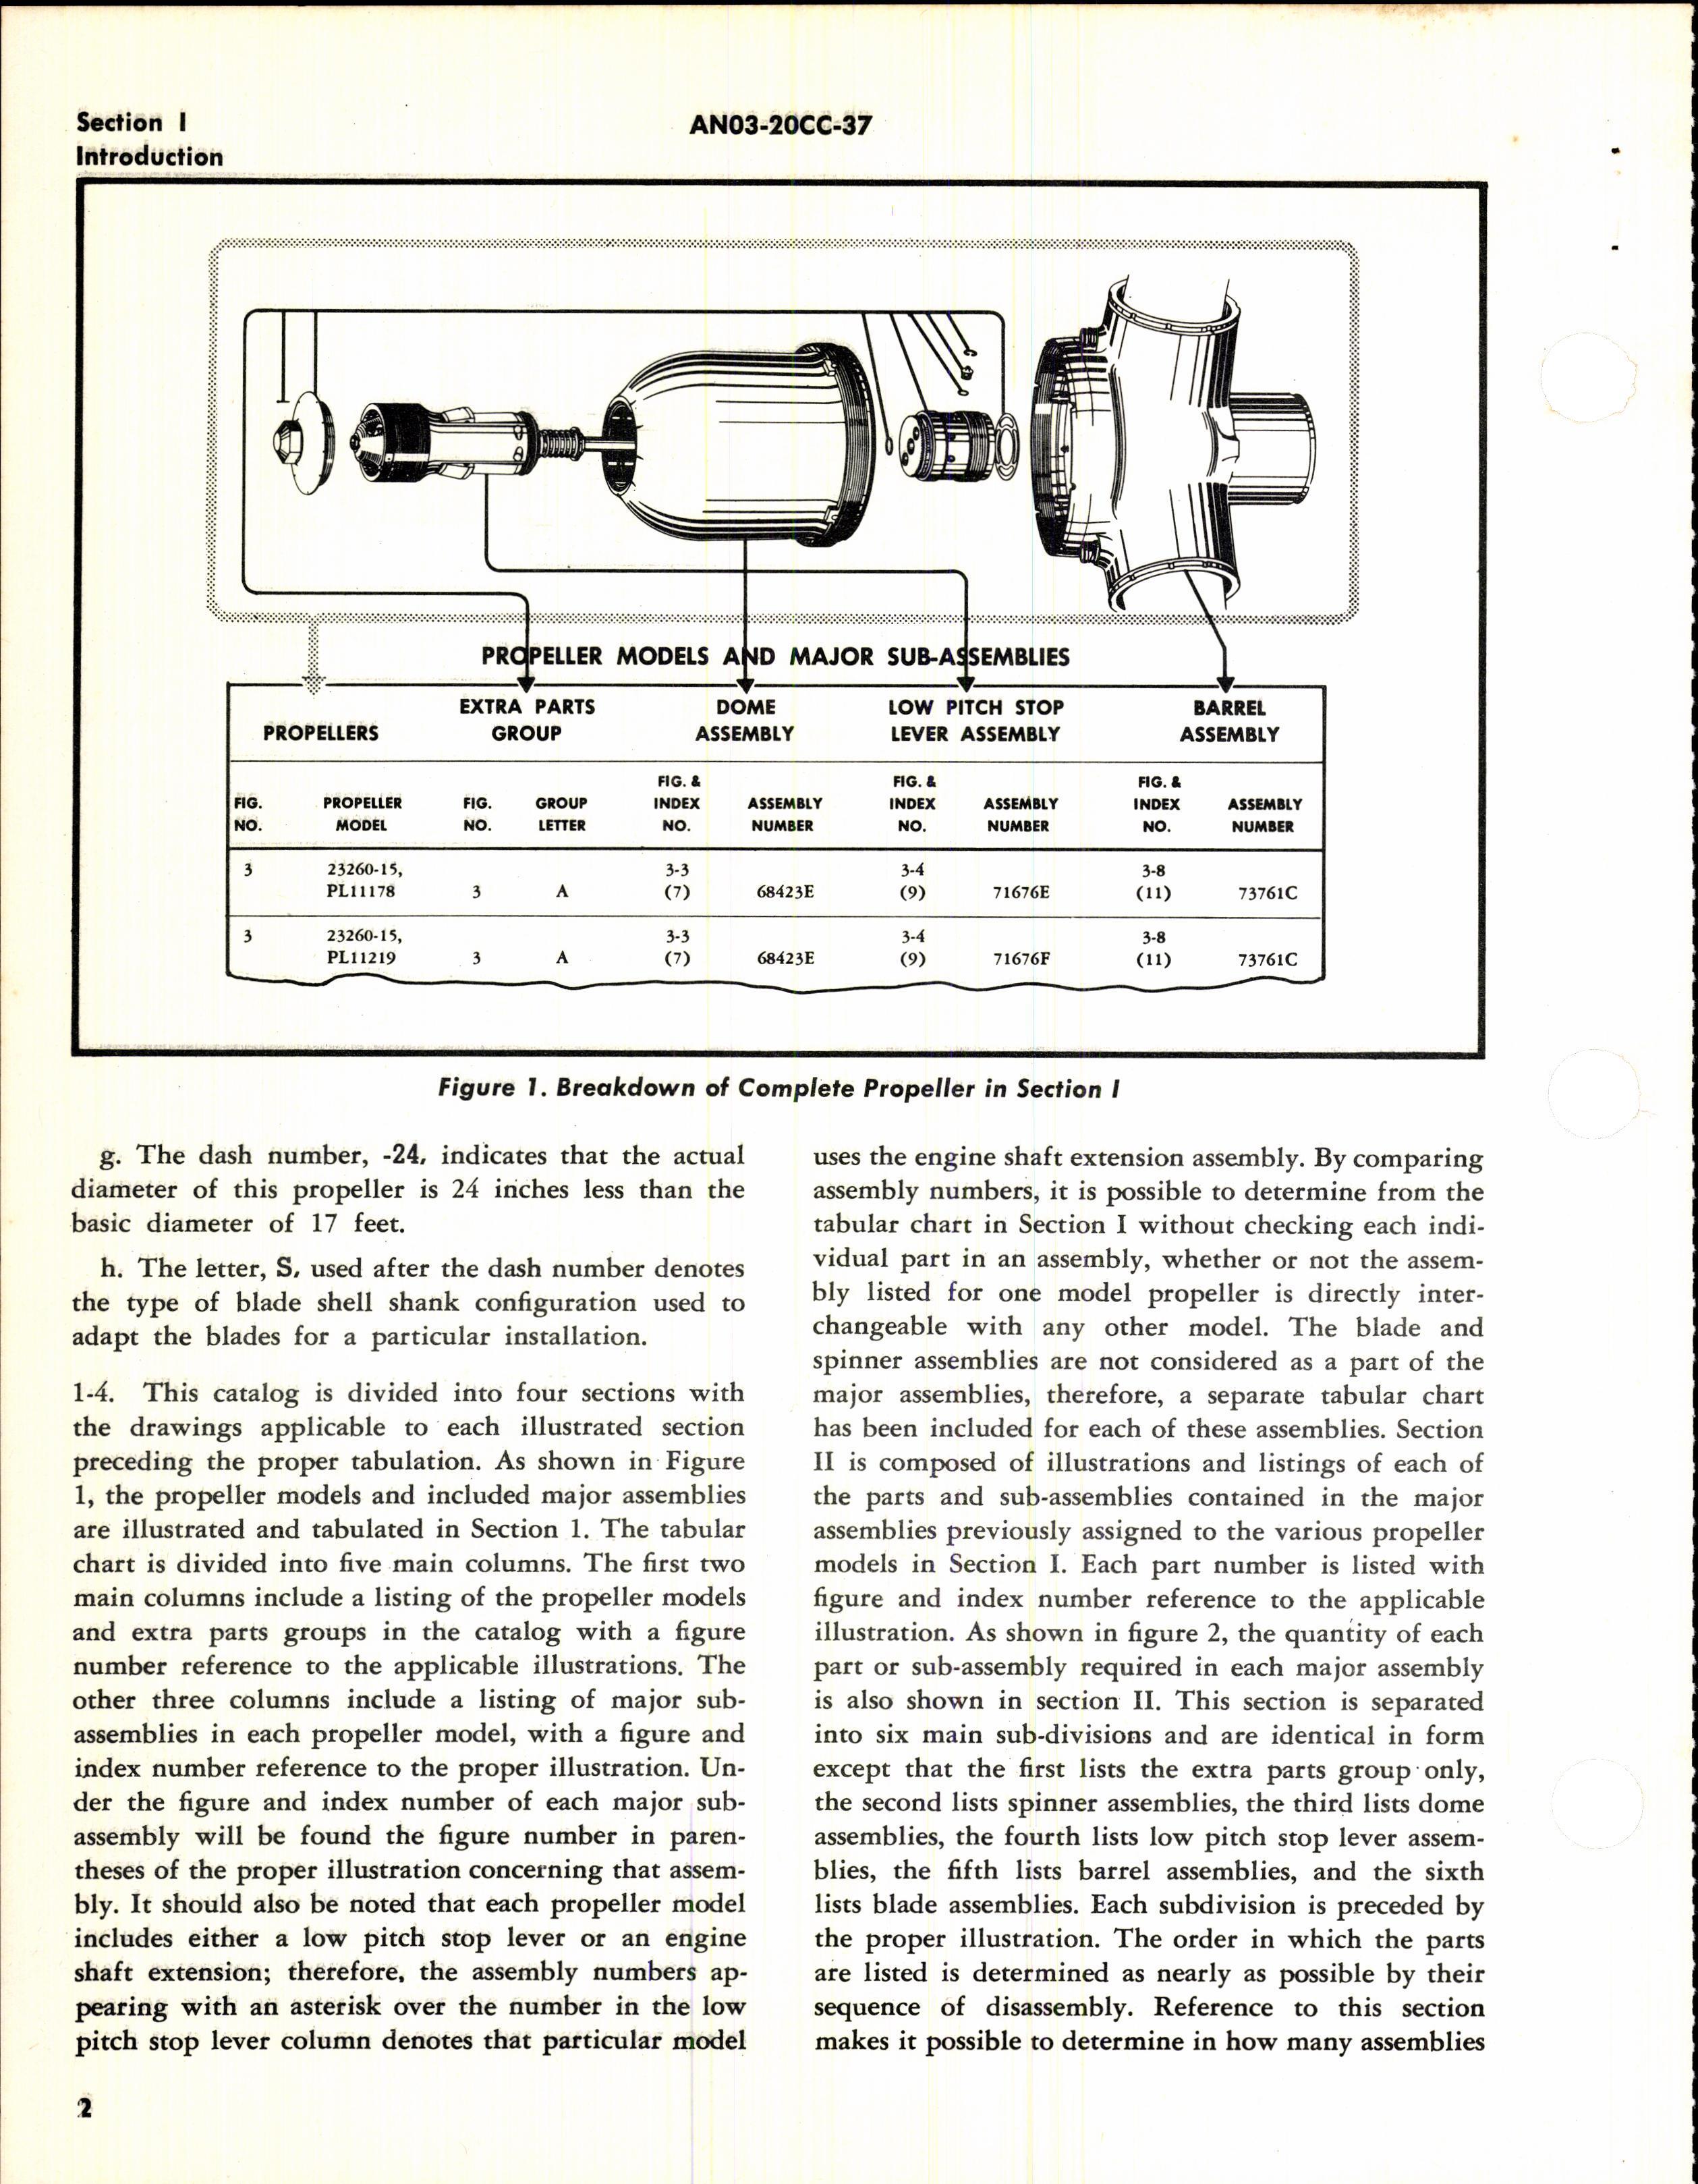 Sample page 6 from AirCorps Library document: Parts Catalog for Reversing Hydromatic Propeller Models 23260 and 24260